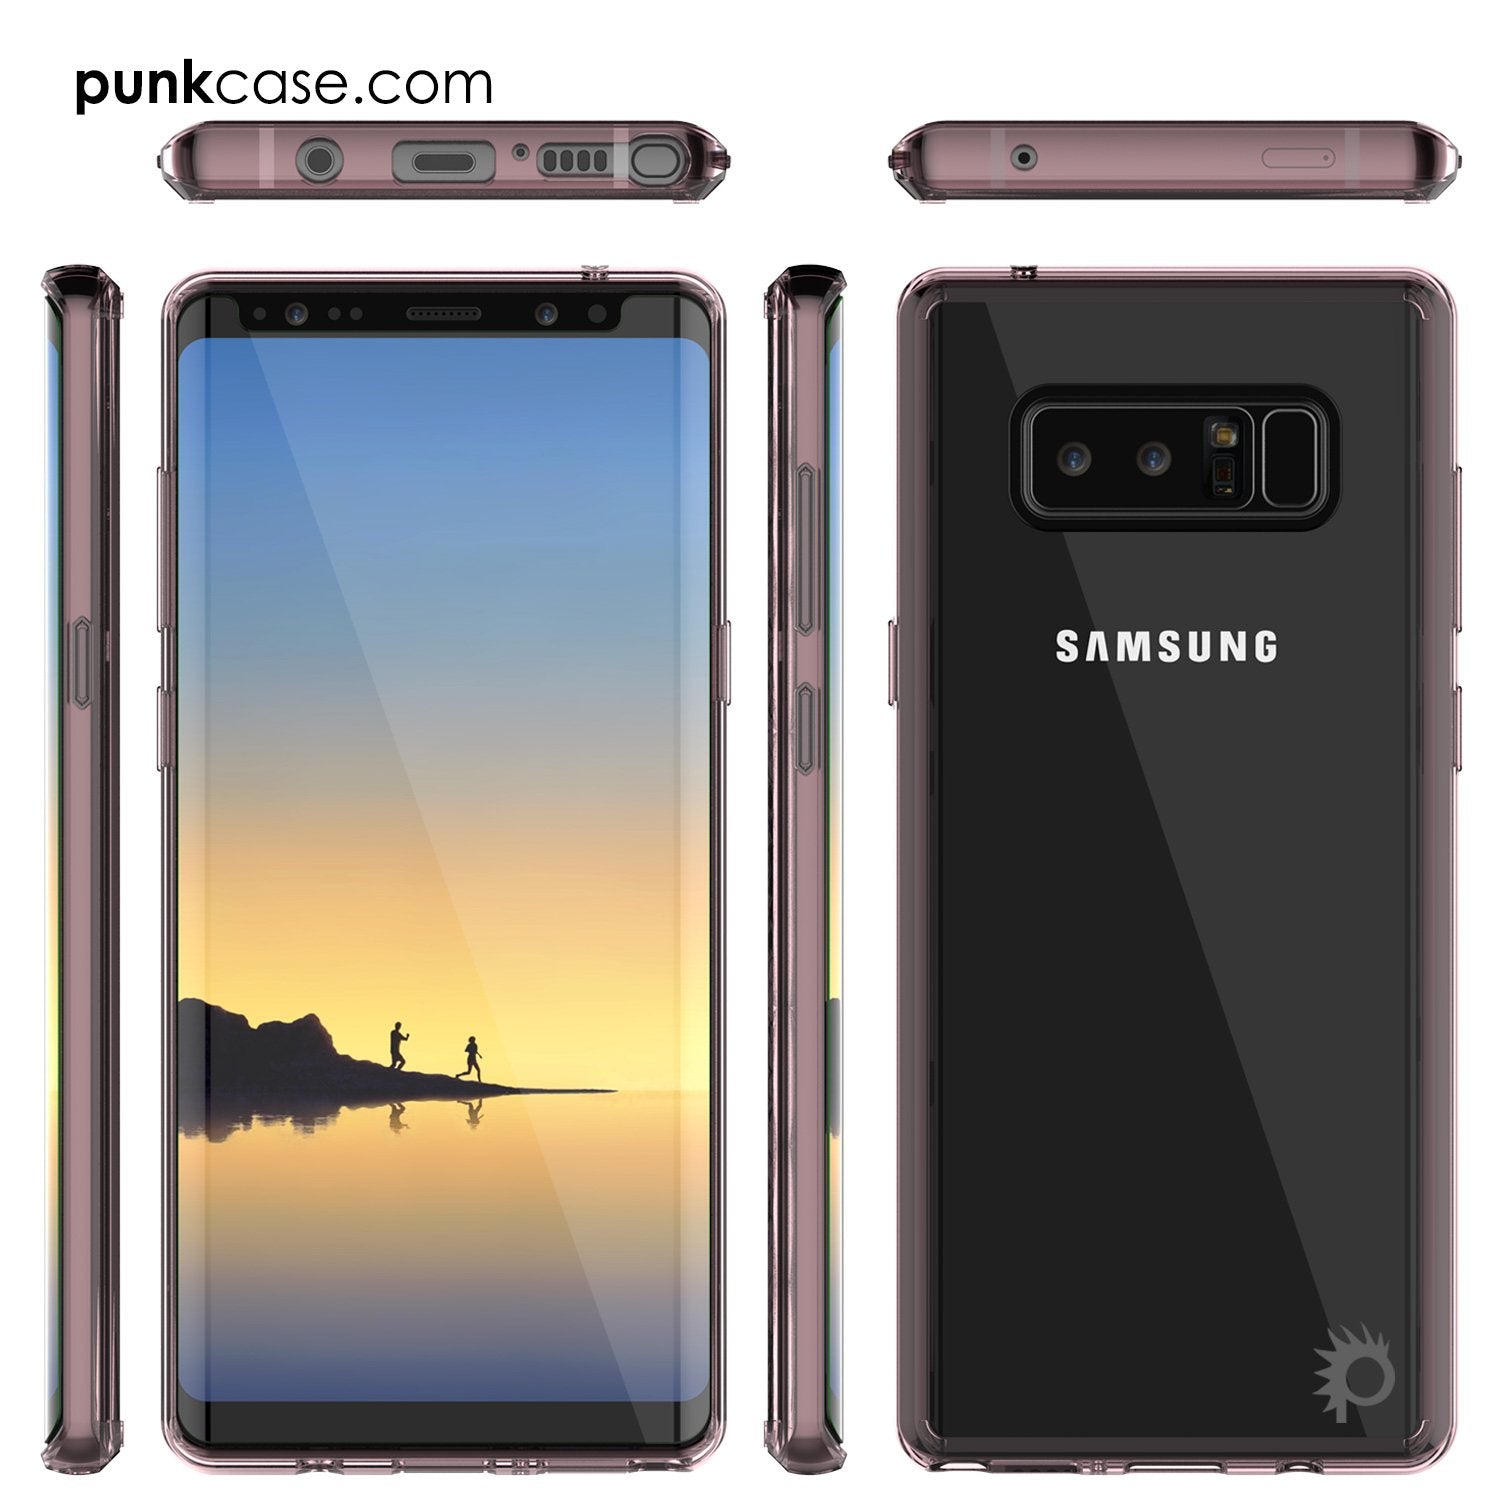 Galaxy Note 8 Case, PUNKcase [LUCID 2.0 Series] [Slim Fit] Armor Cover w/Integrated Anti-Shock System & PUNKSHIELD Screen Protector [Crystal Pink]